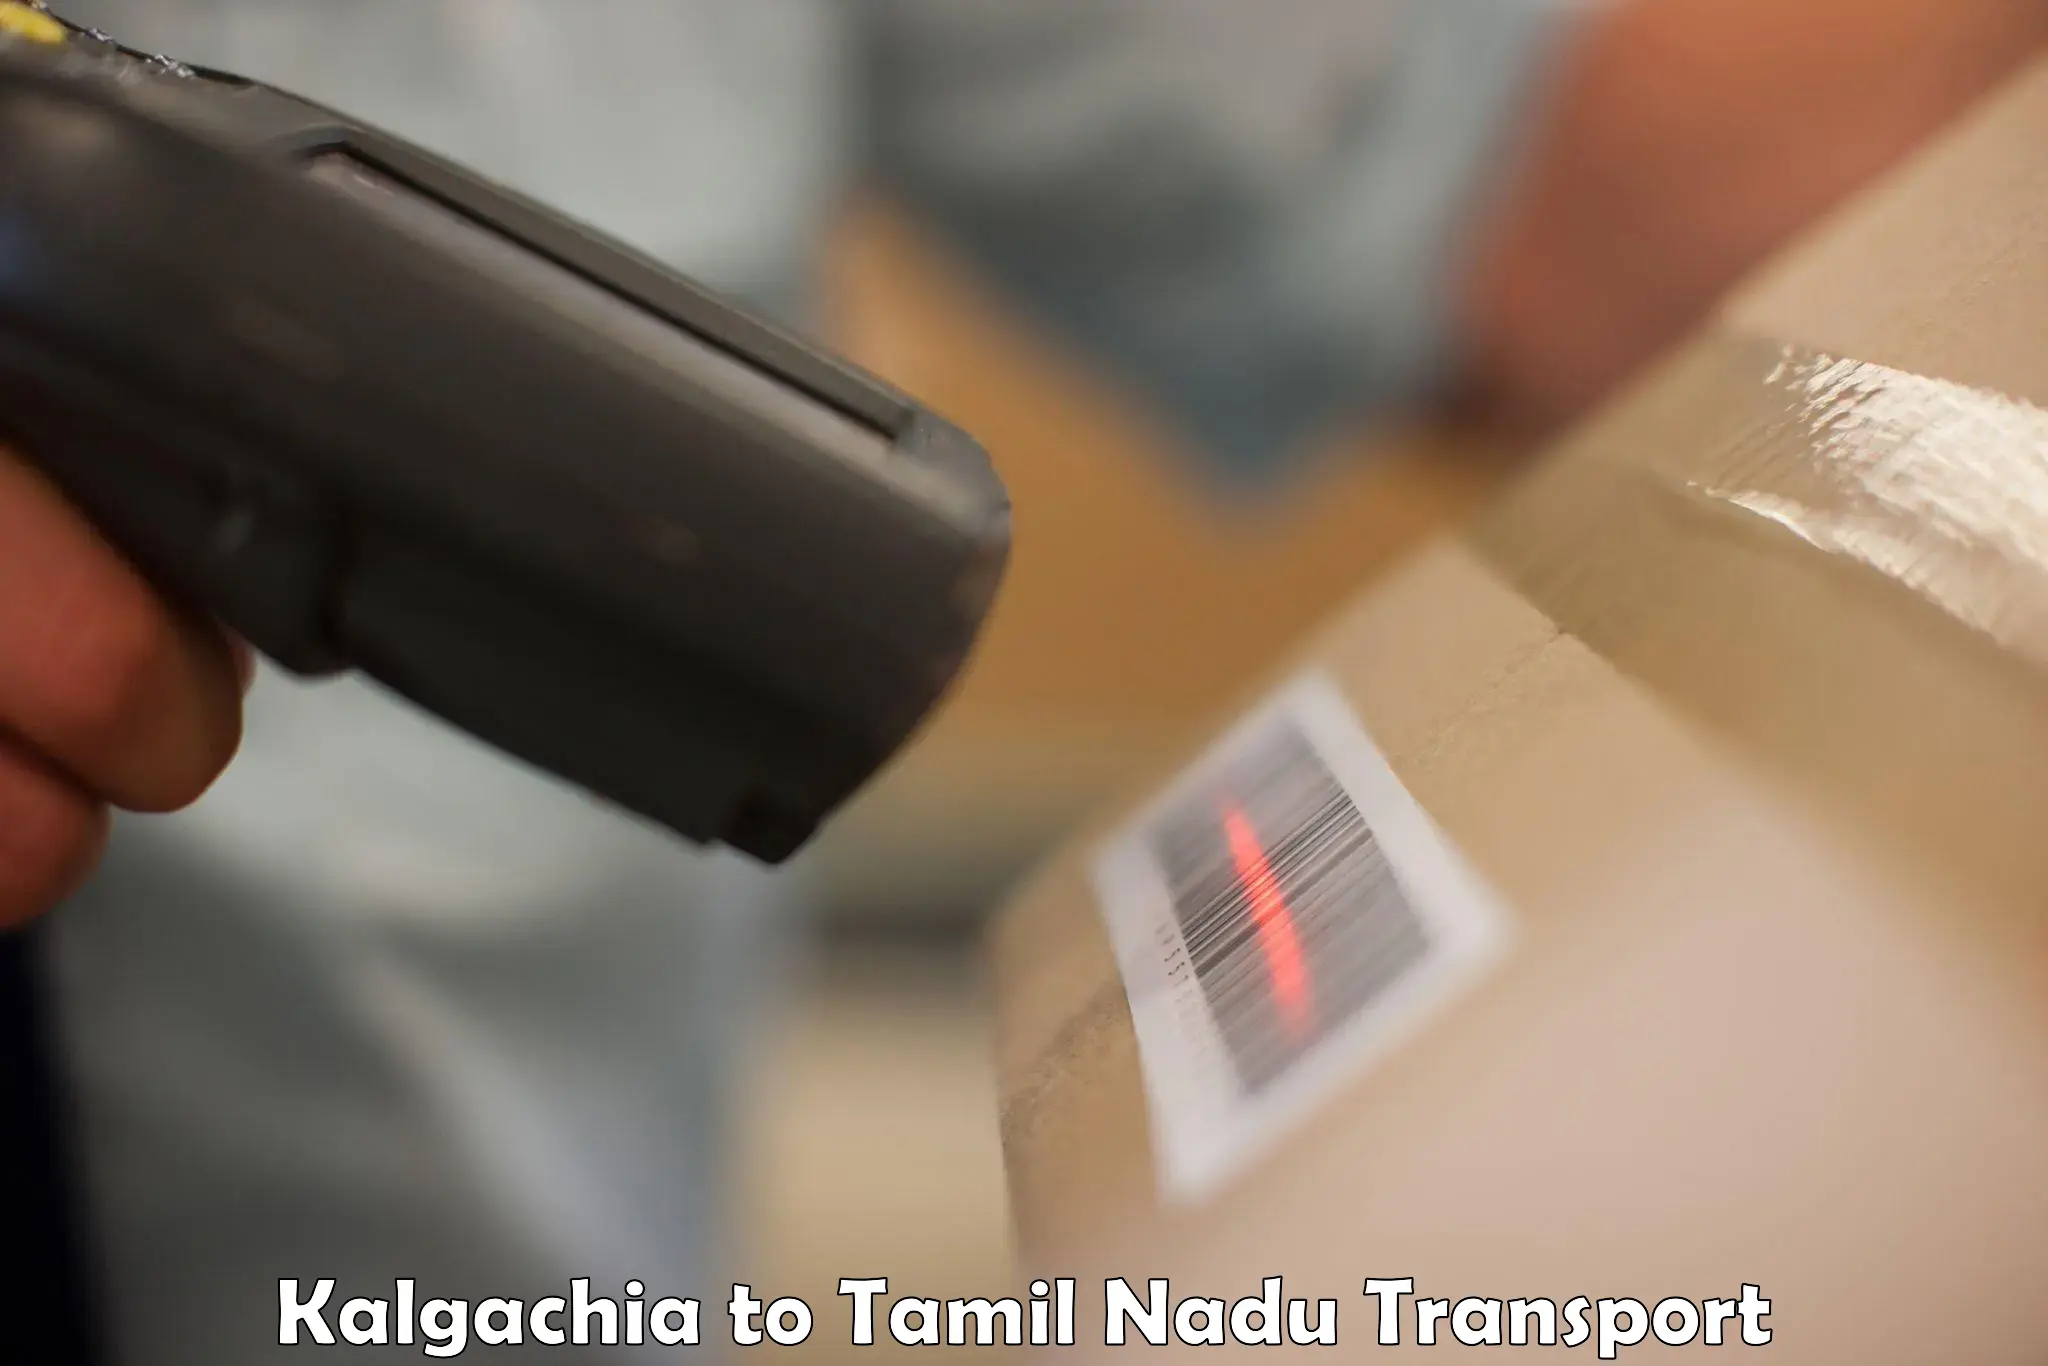 Nearest transport service Kalgachia to Shanmugha Arts Science Technology and Research Academy Thanjavur